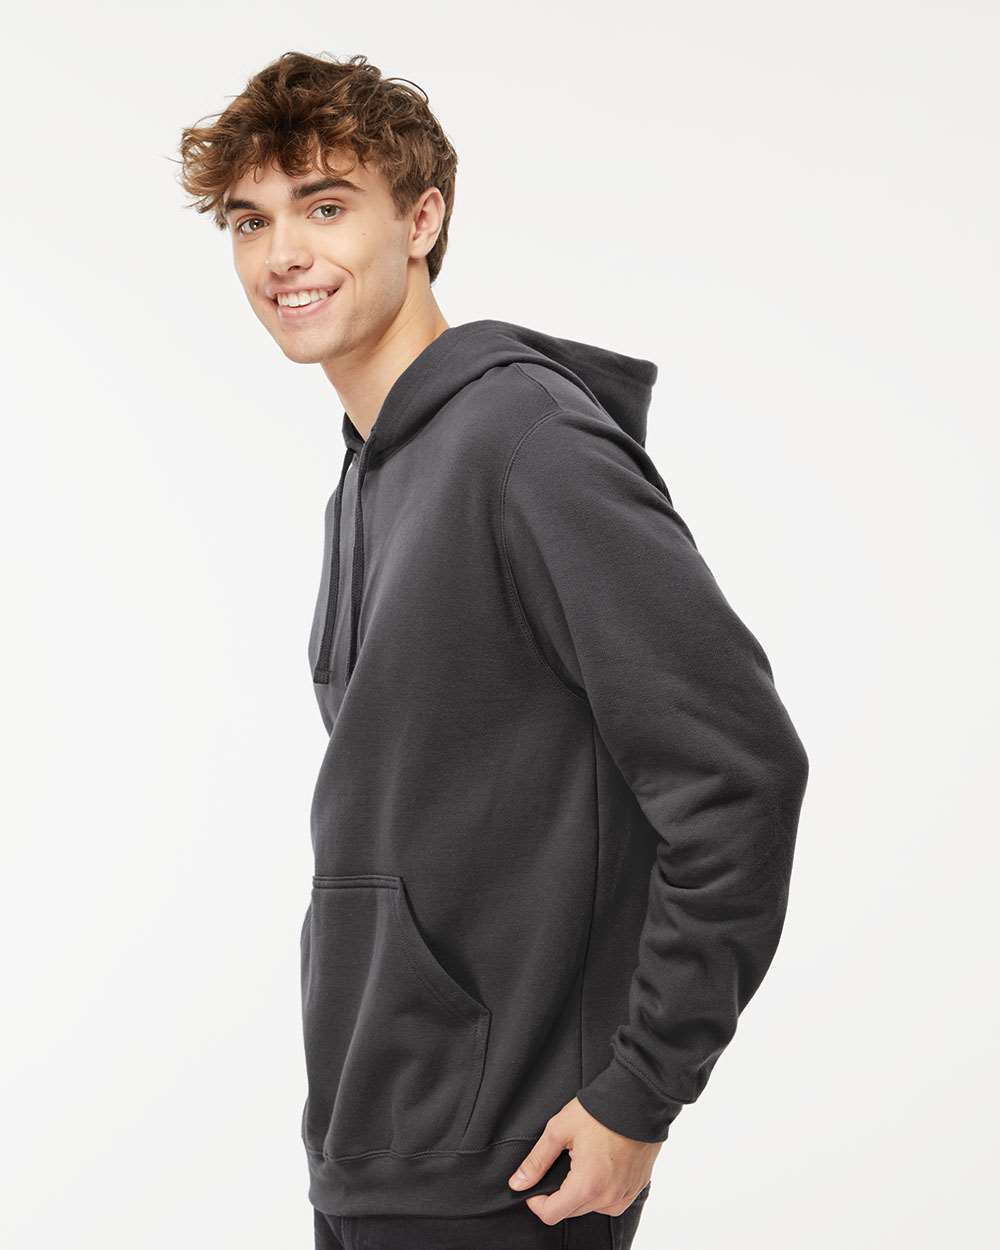 M&O Unisex Pullover Hoodie 3320 #colormdl_Charcoal